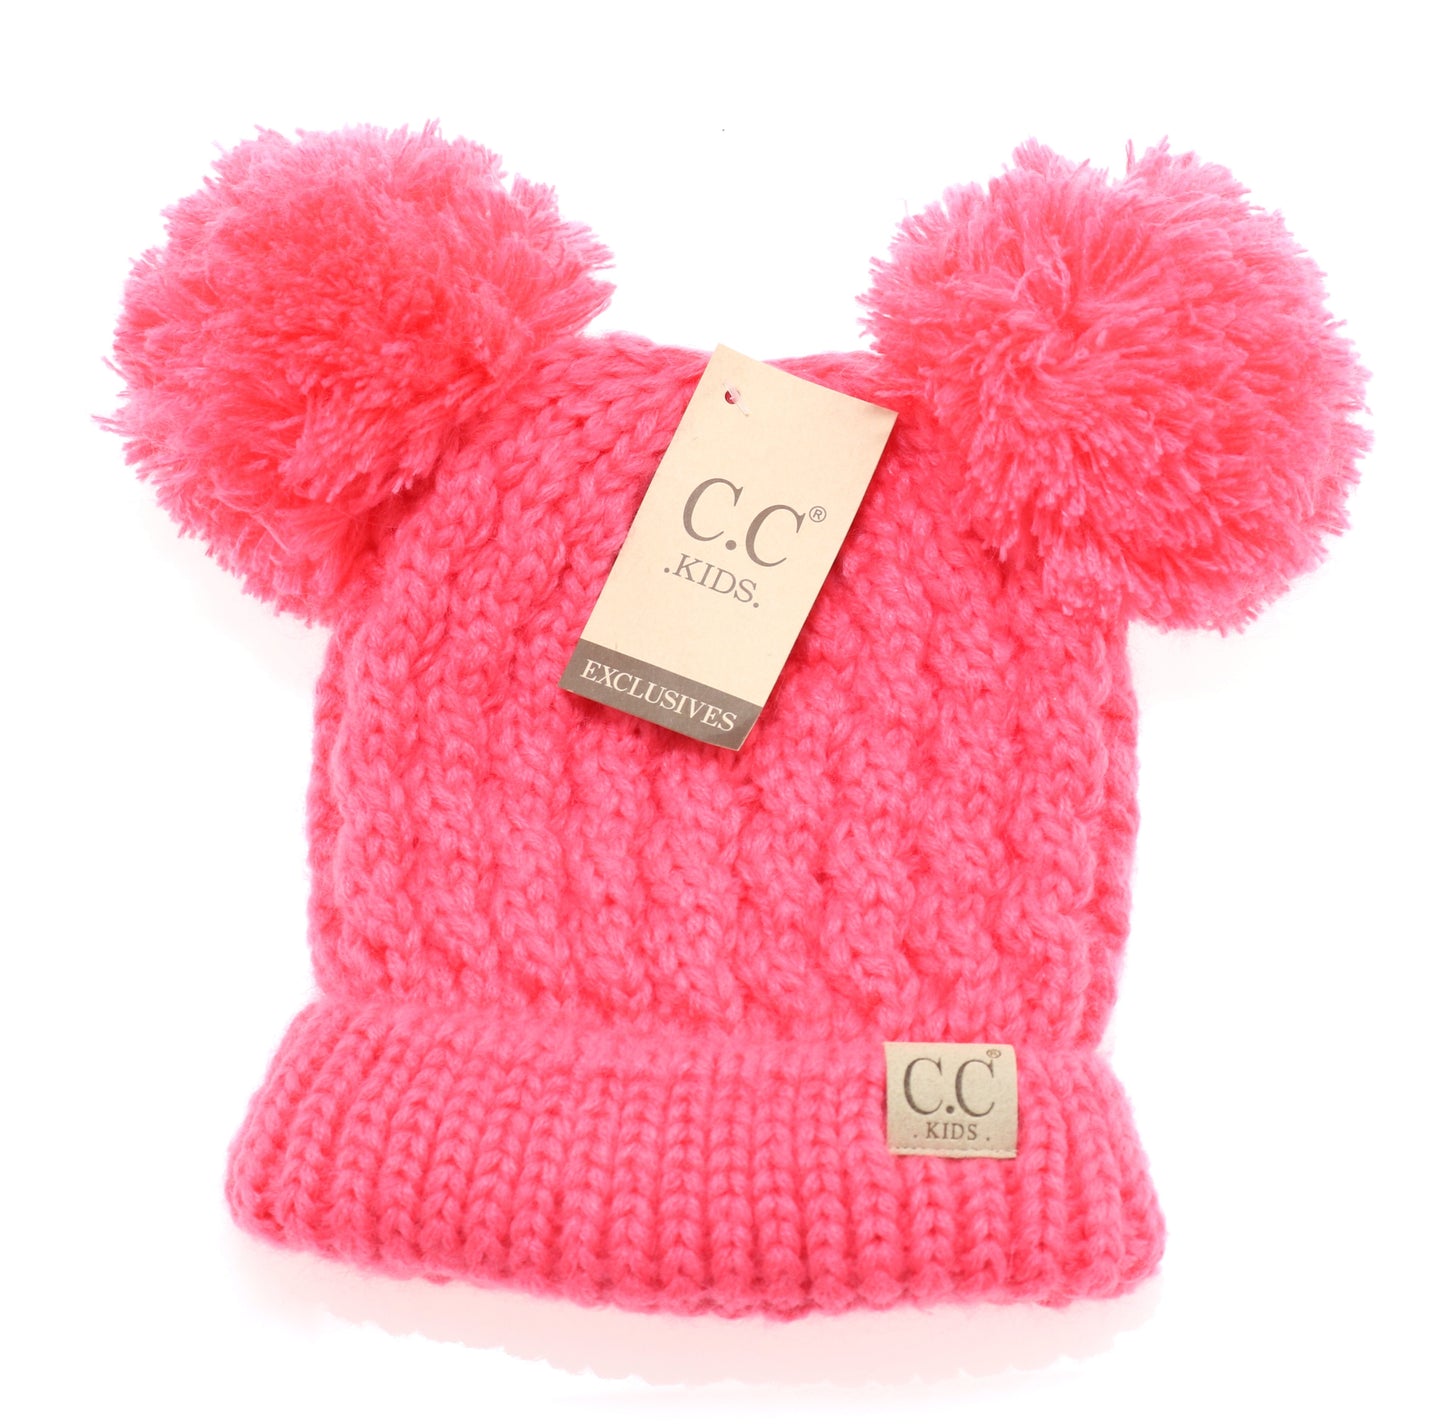 CC Kid's Double Pom Beanie in New Candy Pink - Pink Julep Boutique